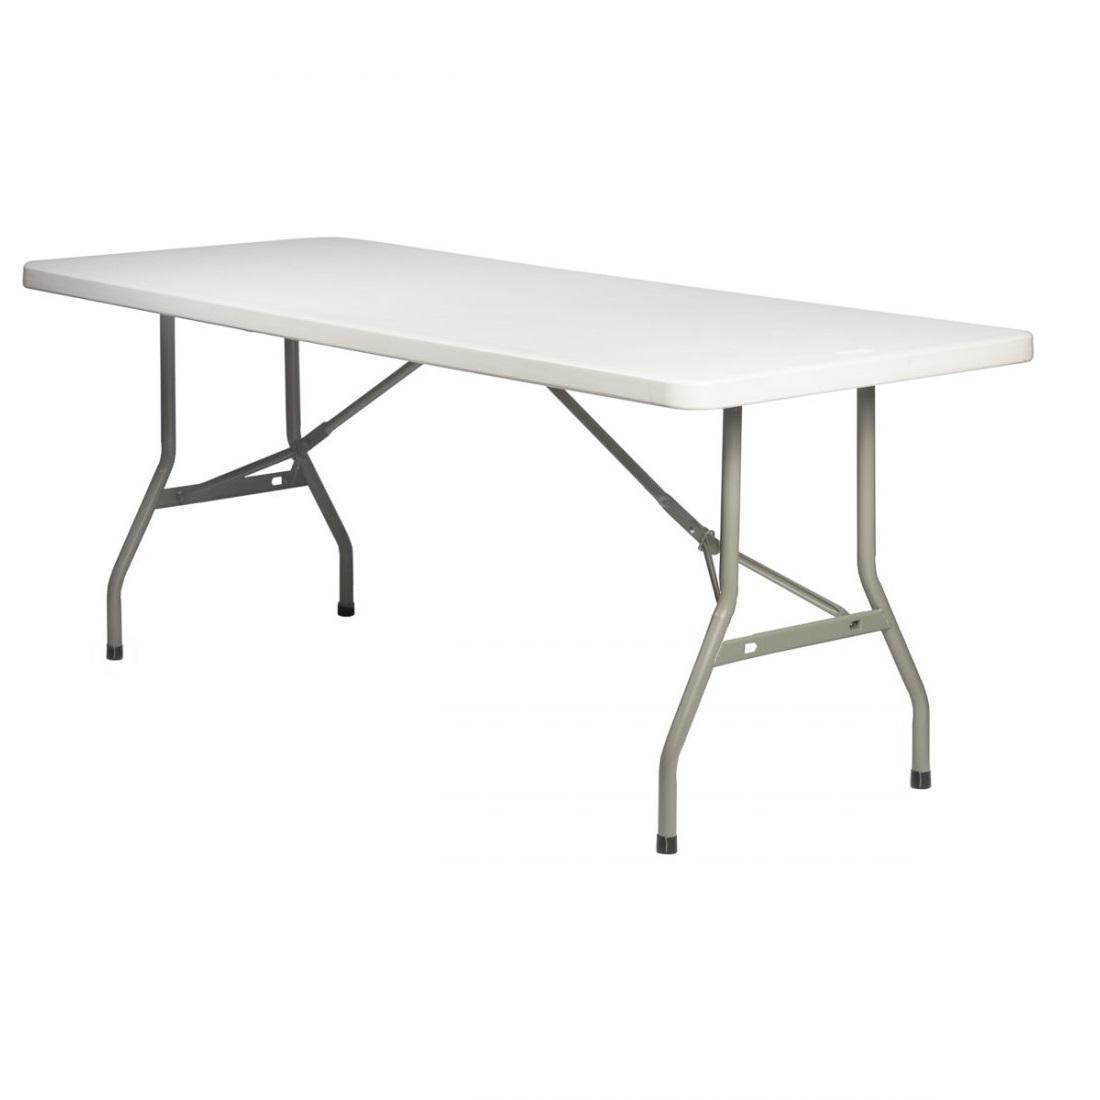 6' Rectangle Table